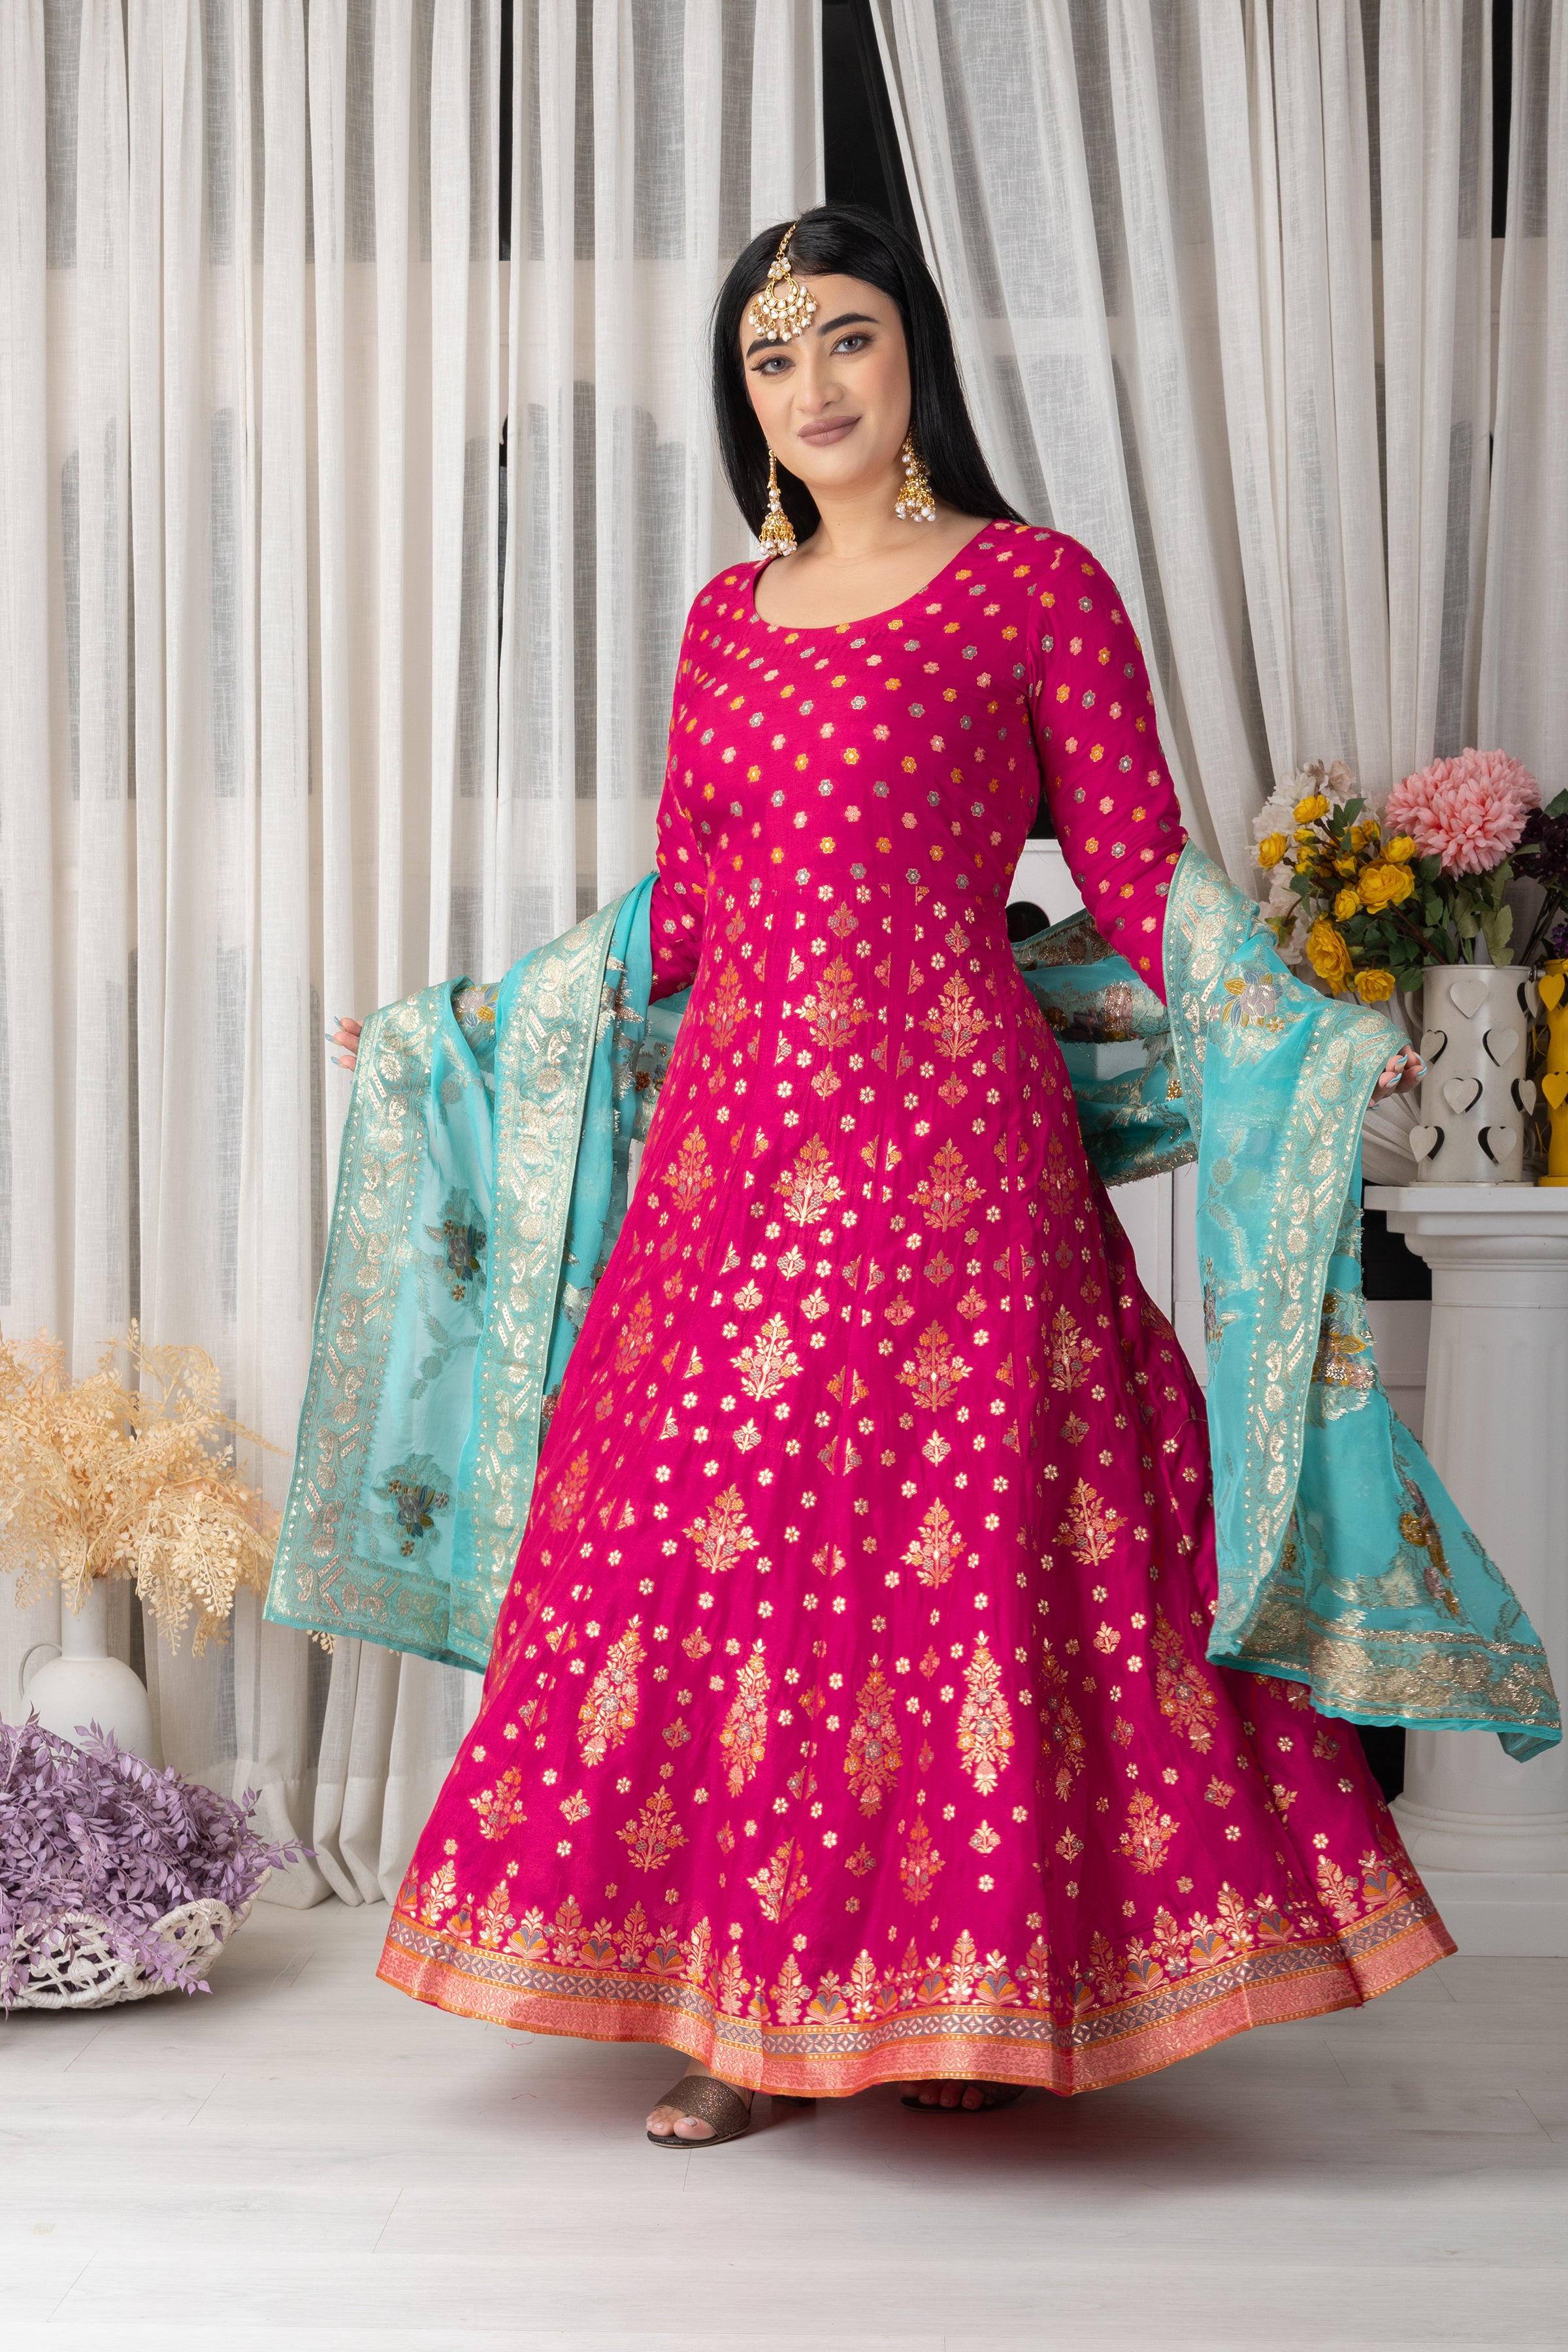 Beautiful Banarasi Silk Anarkali gown with net dupatta. | Suits for women,  Western dresses, Party suits